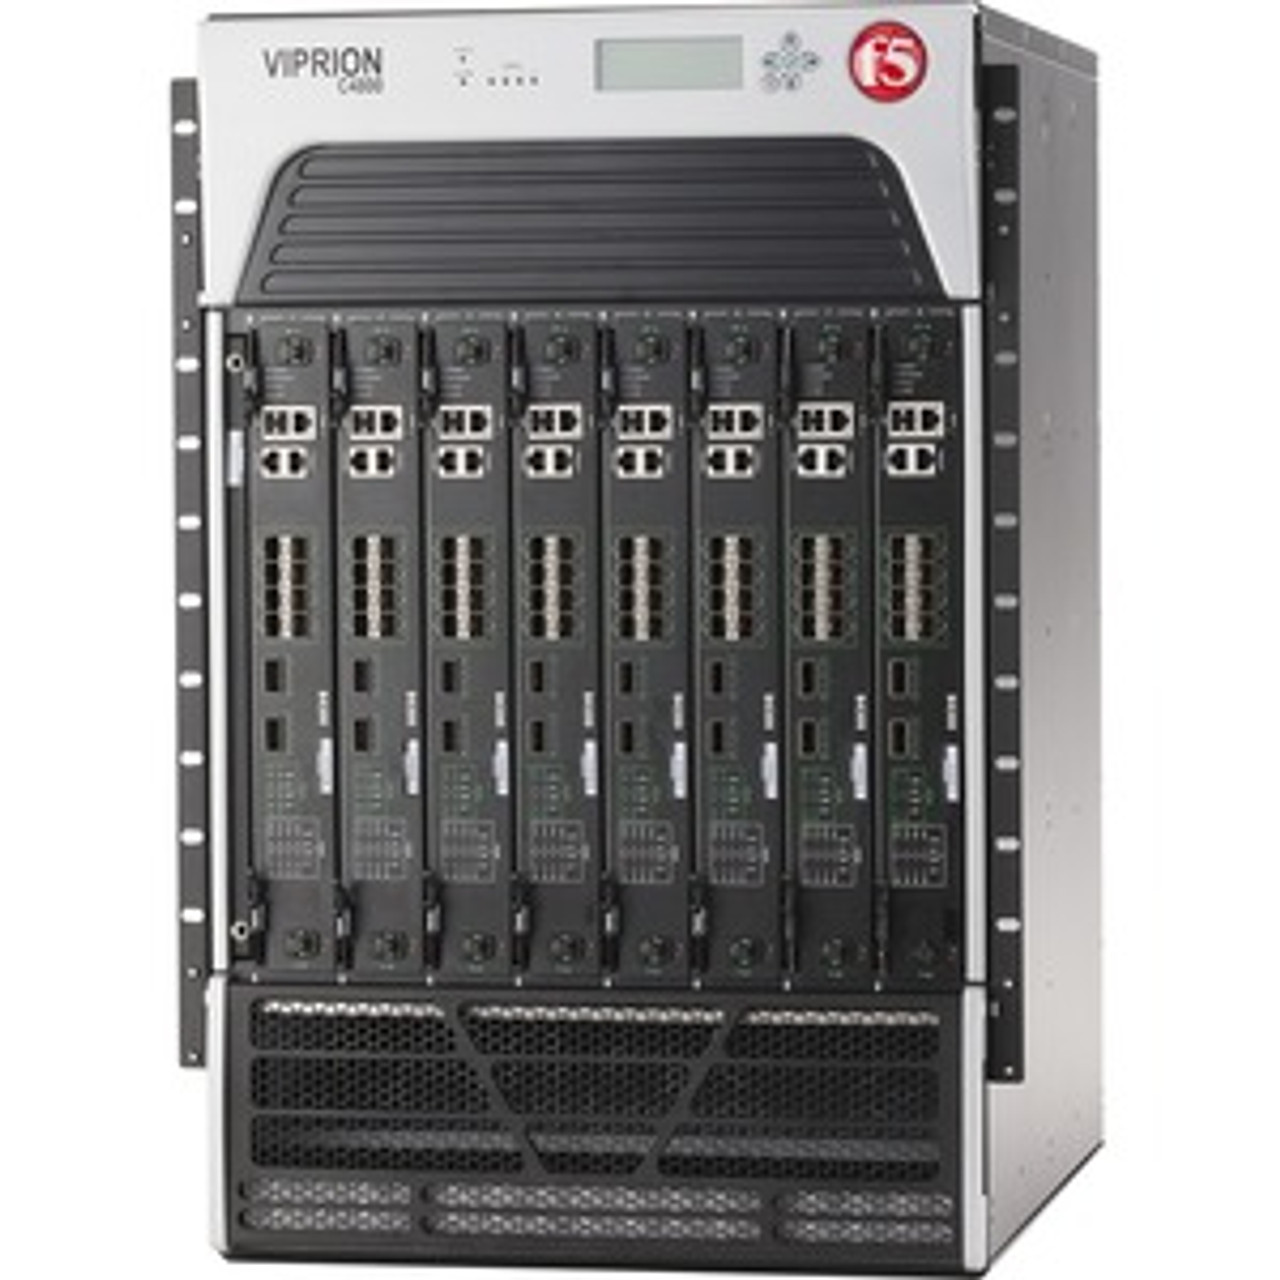 F5-VPR-AFM-C4800-AC F5 Networks VIPRION Chassis Advanced Firewall Manager C4800 8-Slot Chassis 2 AC Power Supplies